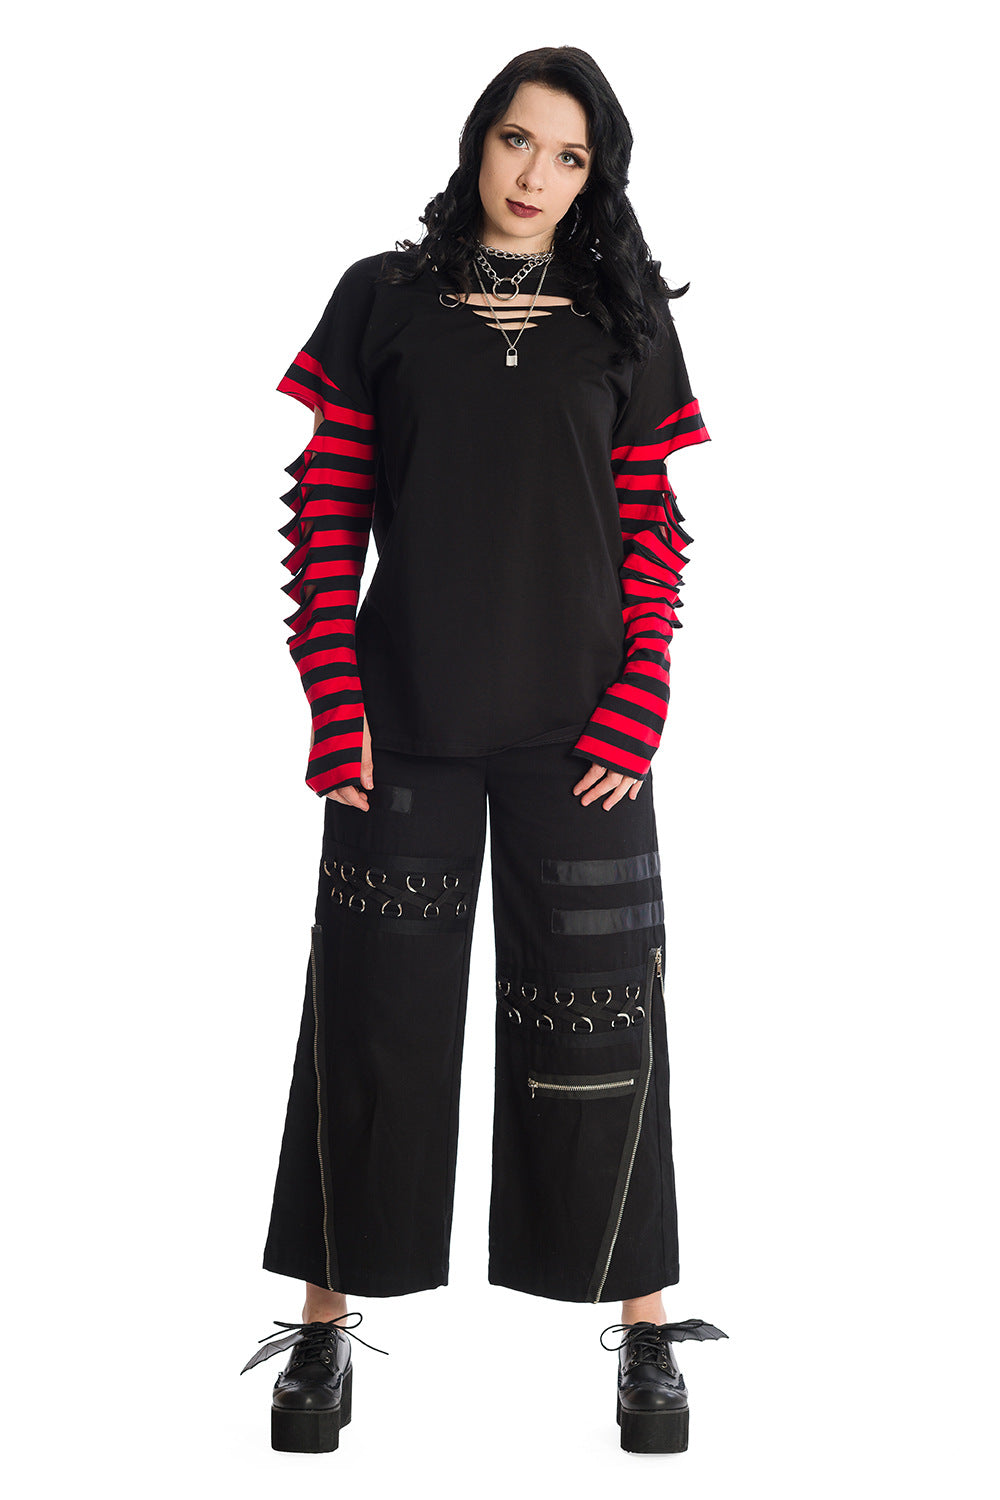 Model wearing Baggy black trousers with zip and buckle features with a long sleeved striped red top with rips 